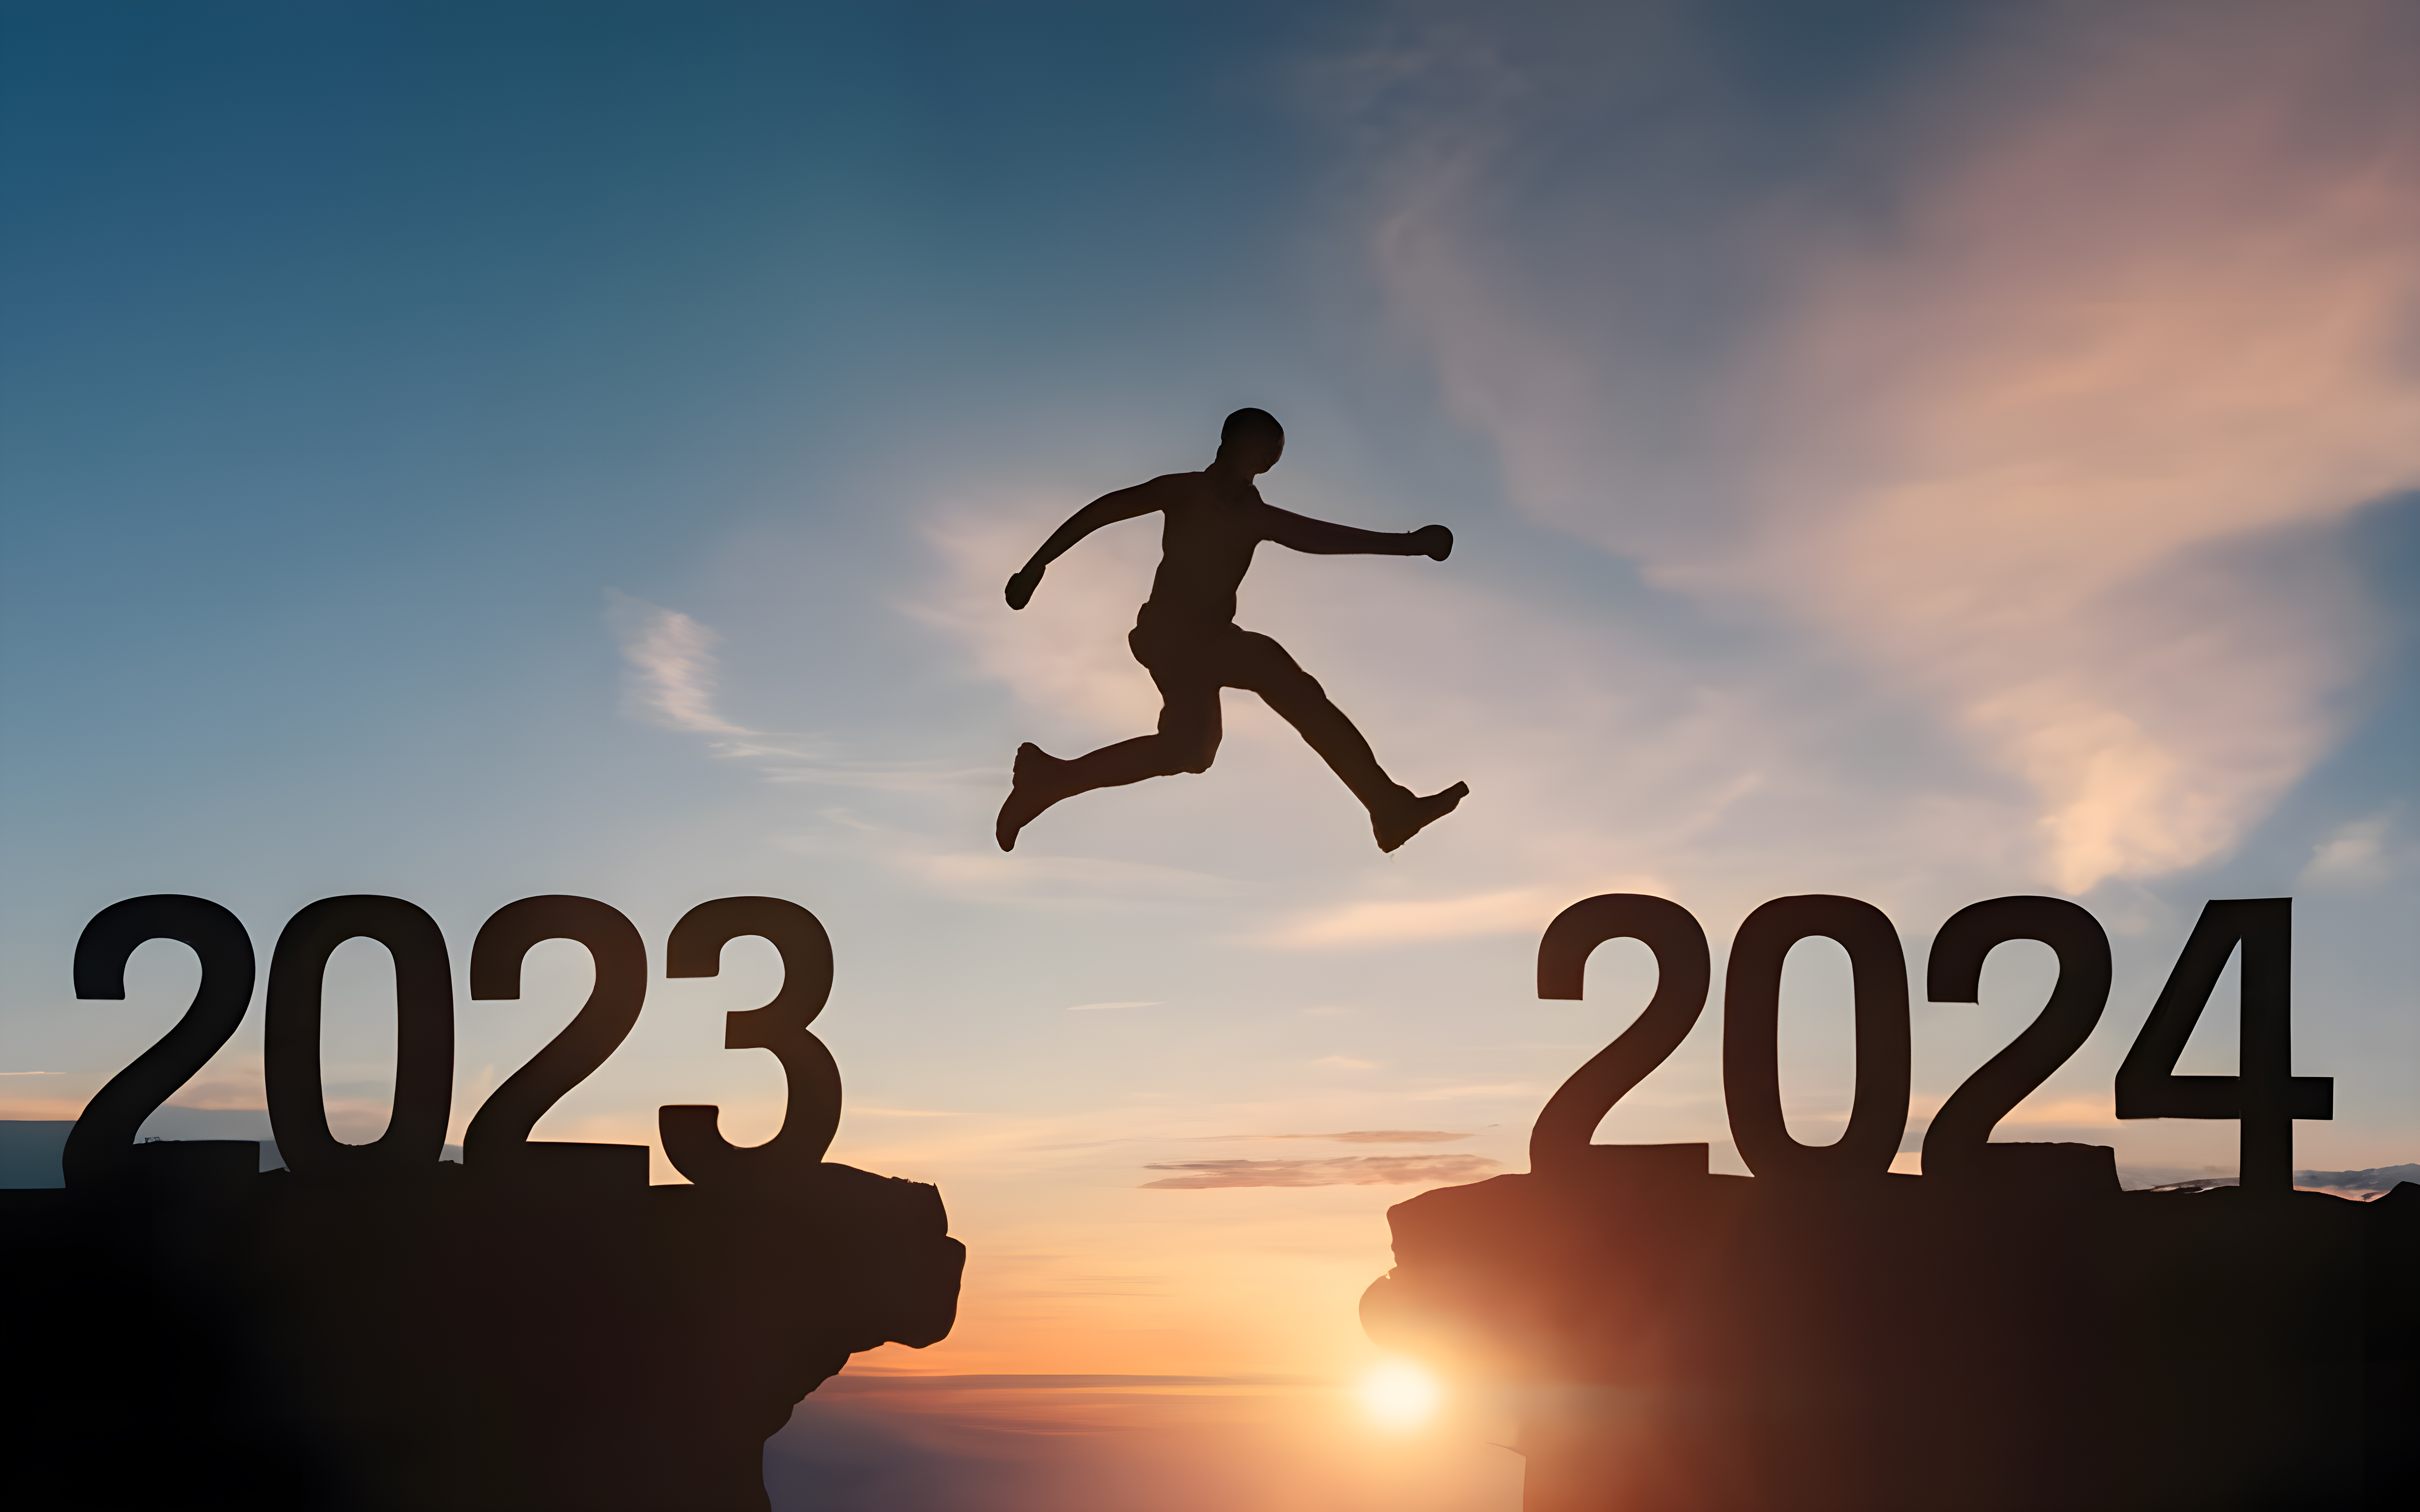 Happy new year 2024, Silhouette Man jumping from 2023 cliff to 2024 cliff on sky background.  Сoncept of moving from year to year. New Year's concept.